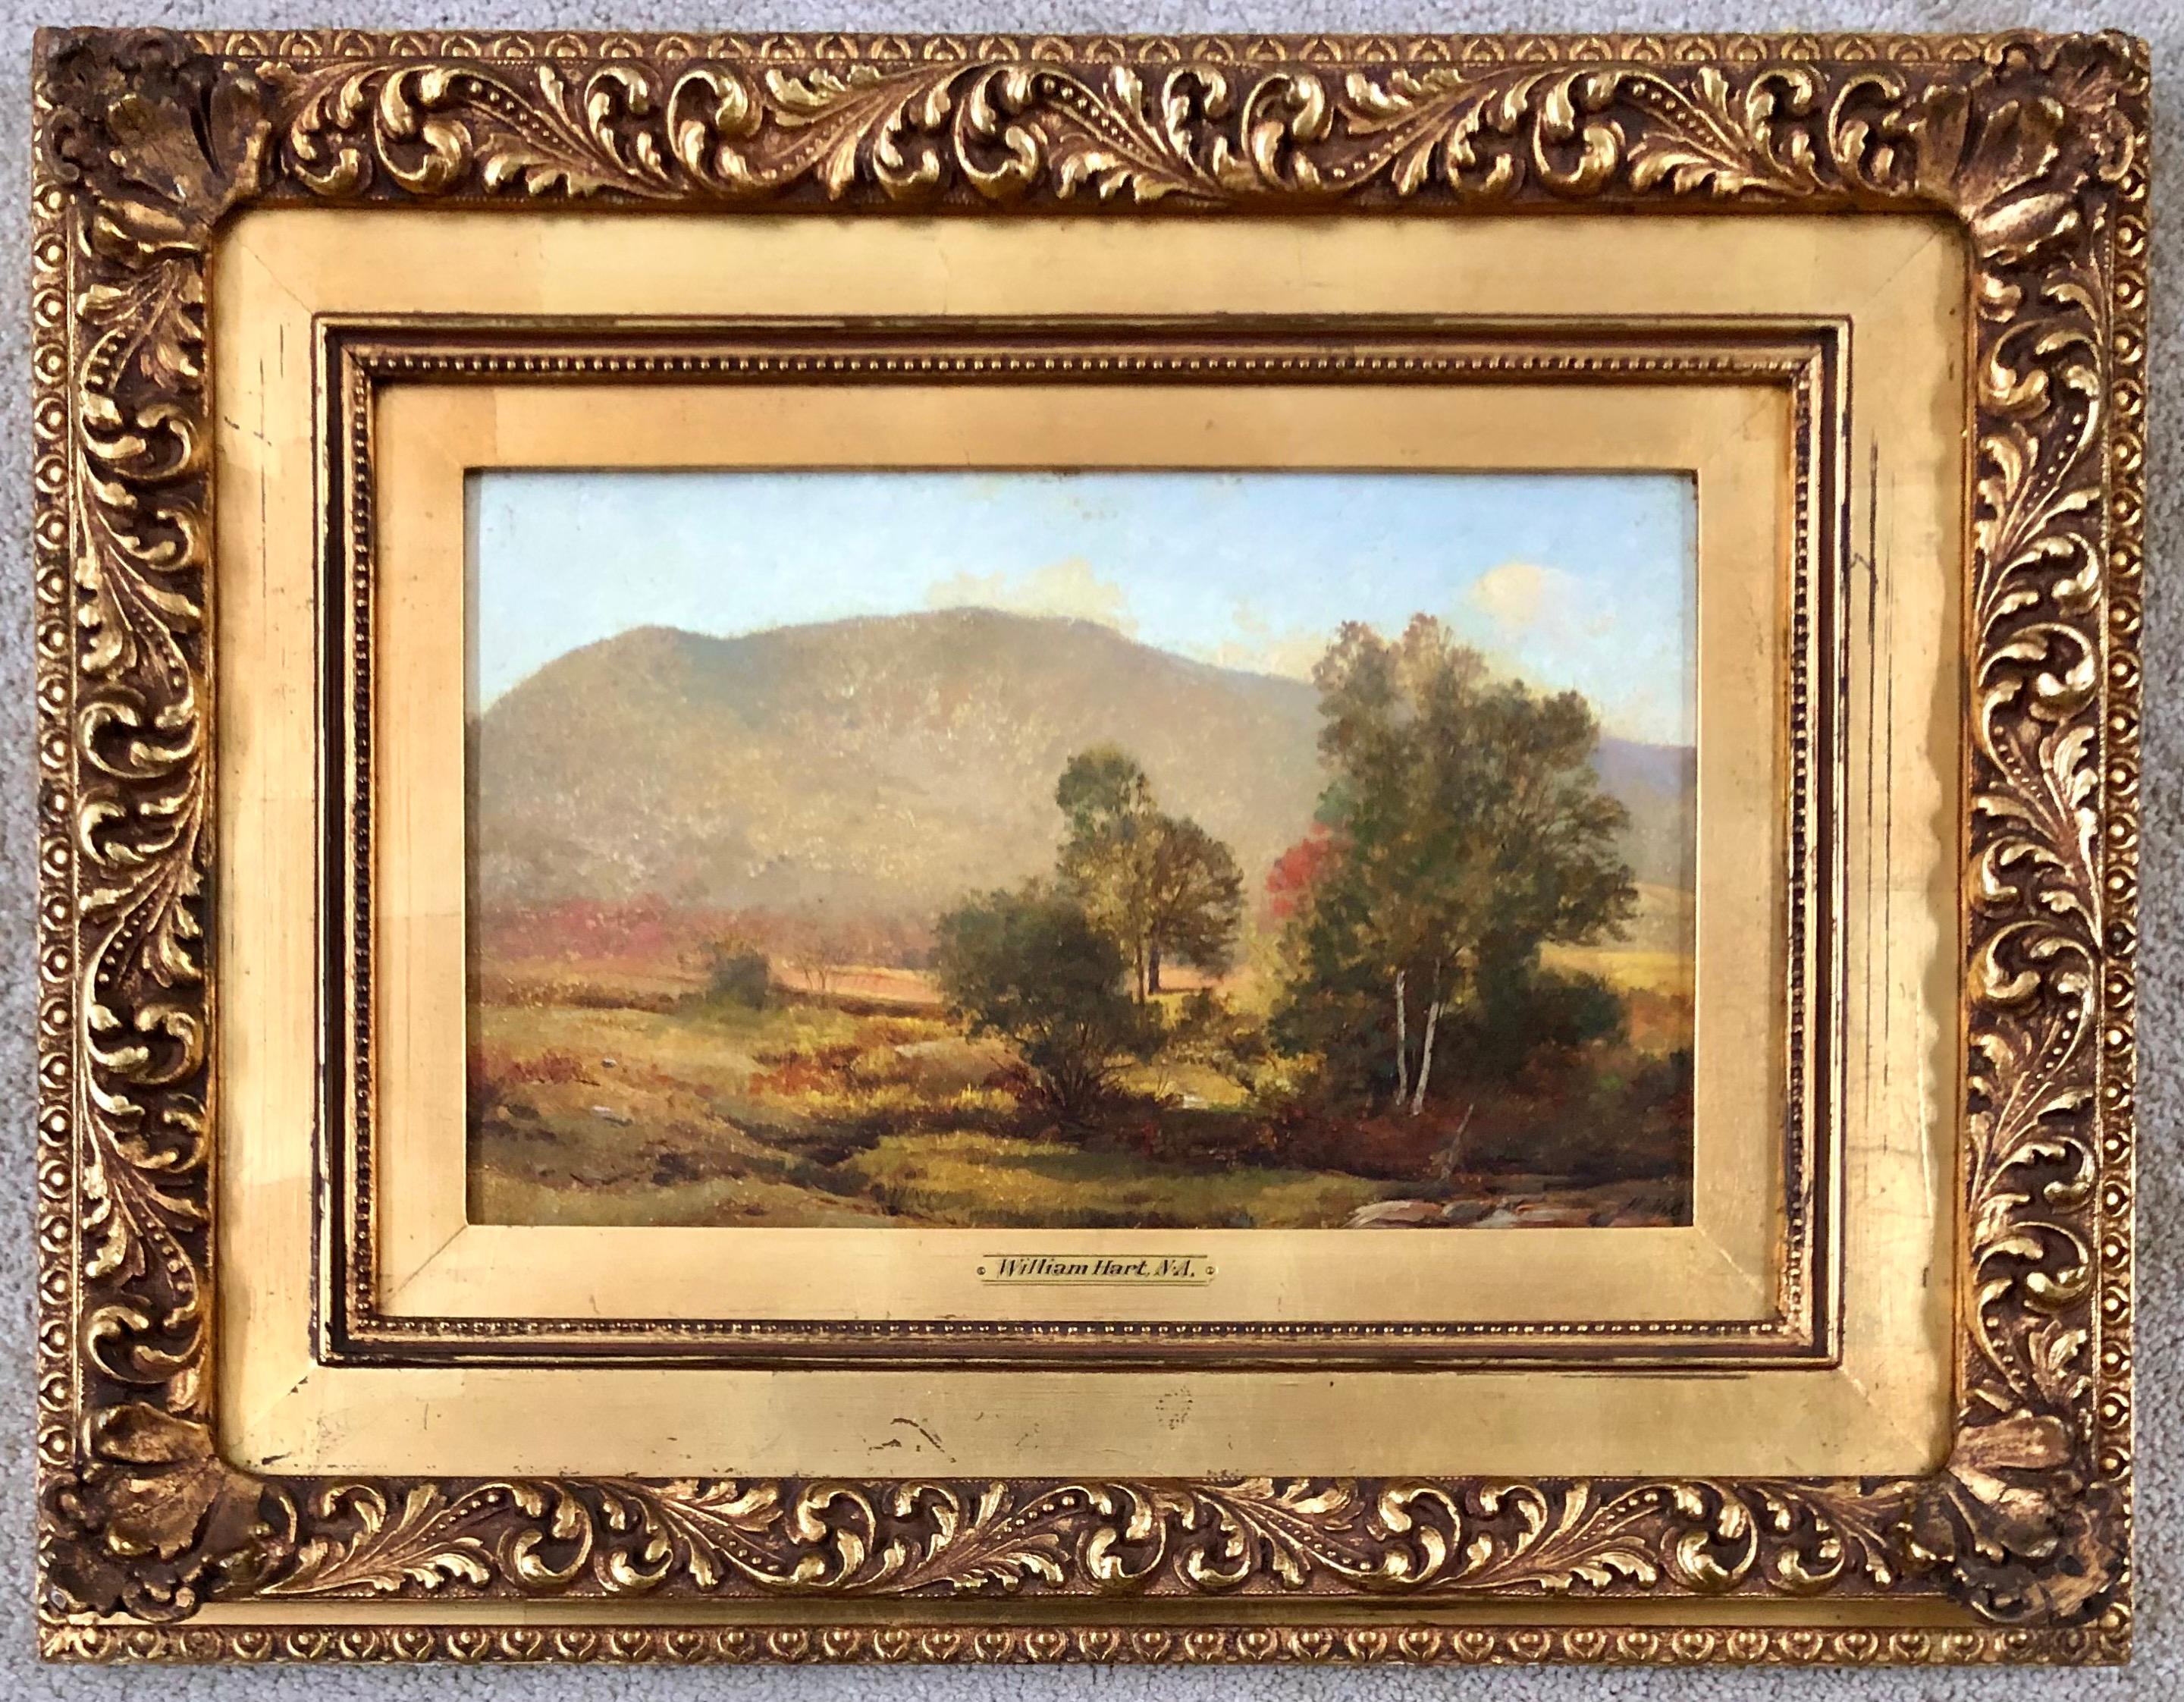 Oil on board, signed lower right. Presented in what is likely the original frame.
Provenance: The Patricia Weiner Gallery, private Midwest Collection.
Measures 10